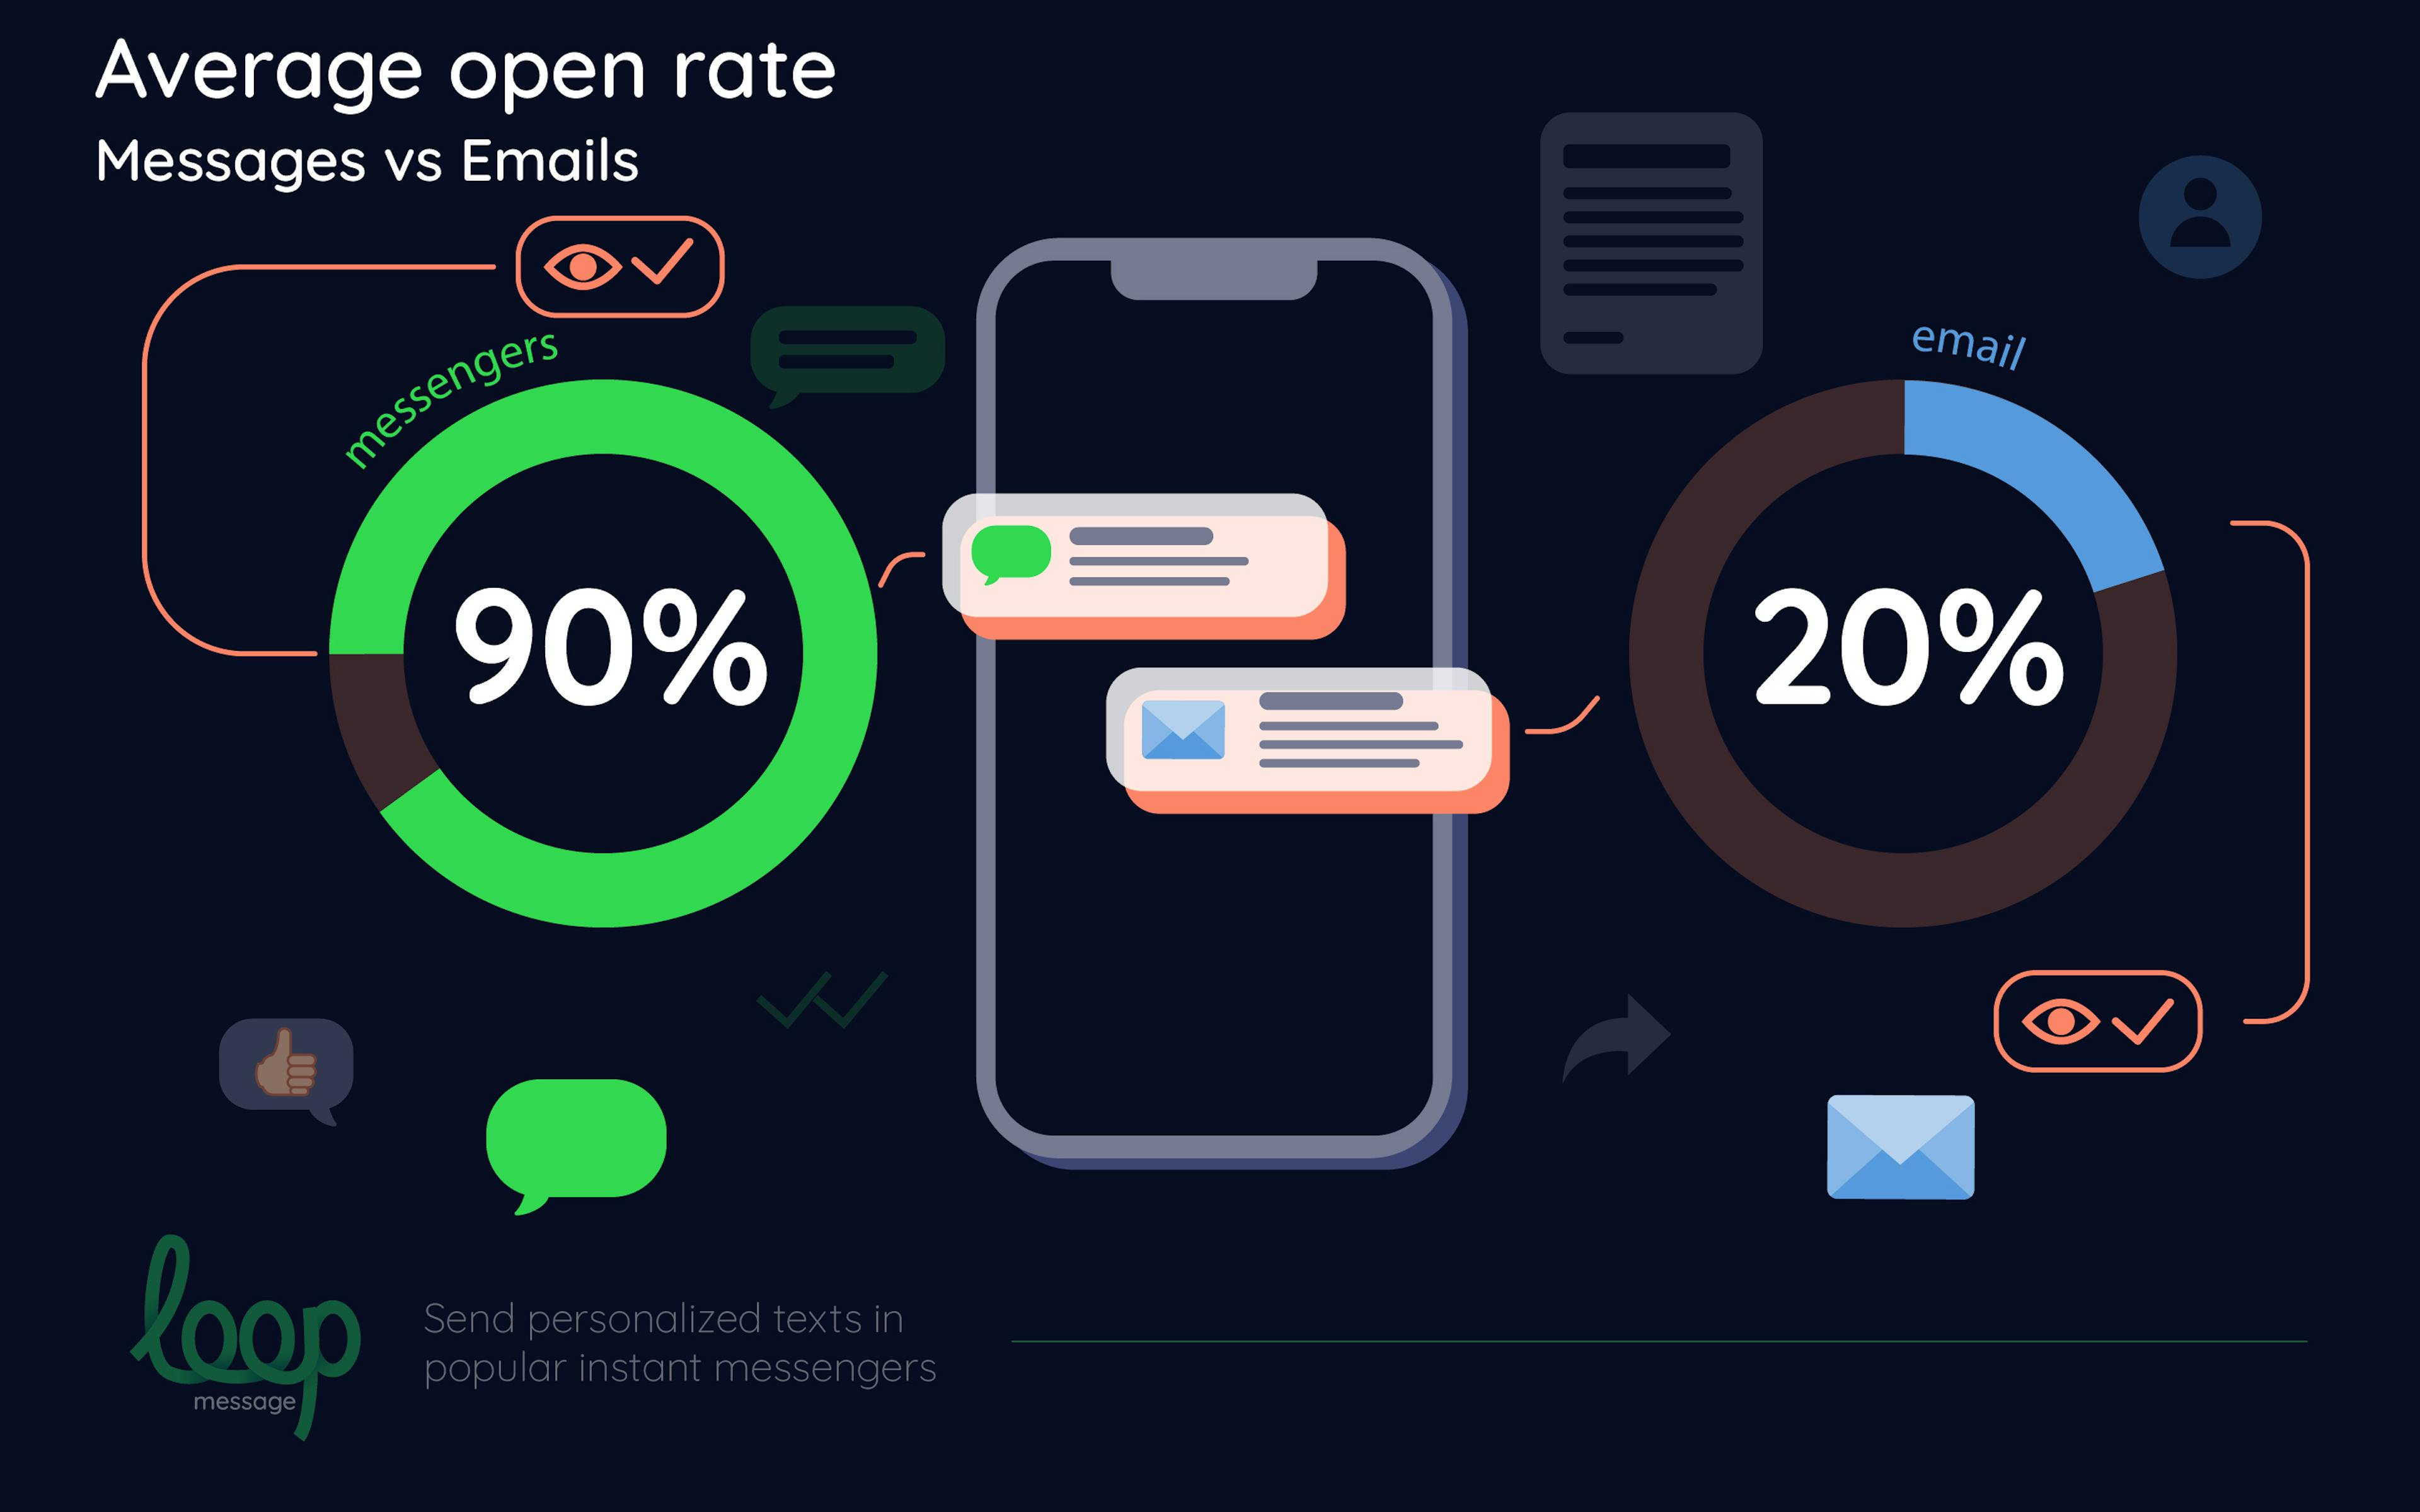 Average open rate (Messages vs. Emails)